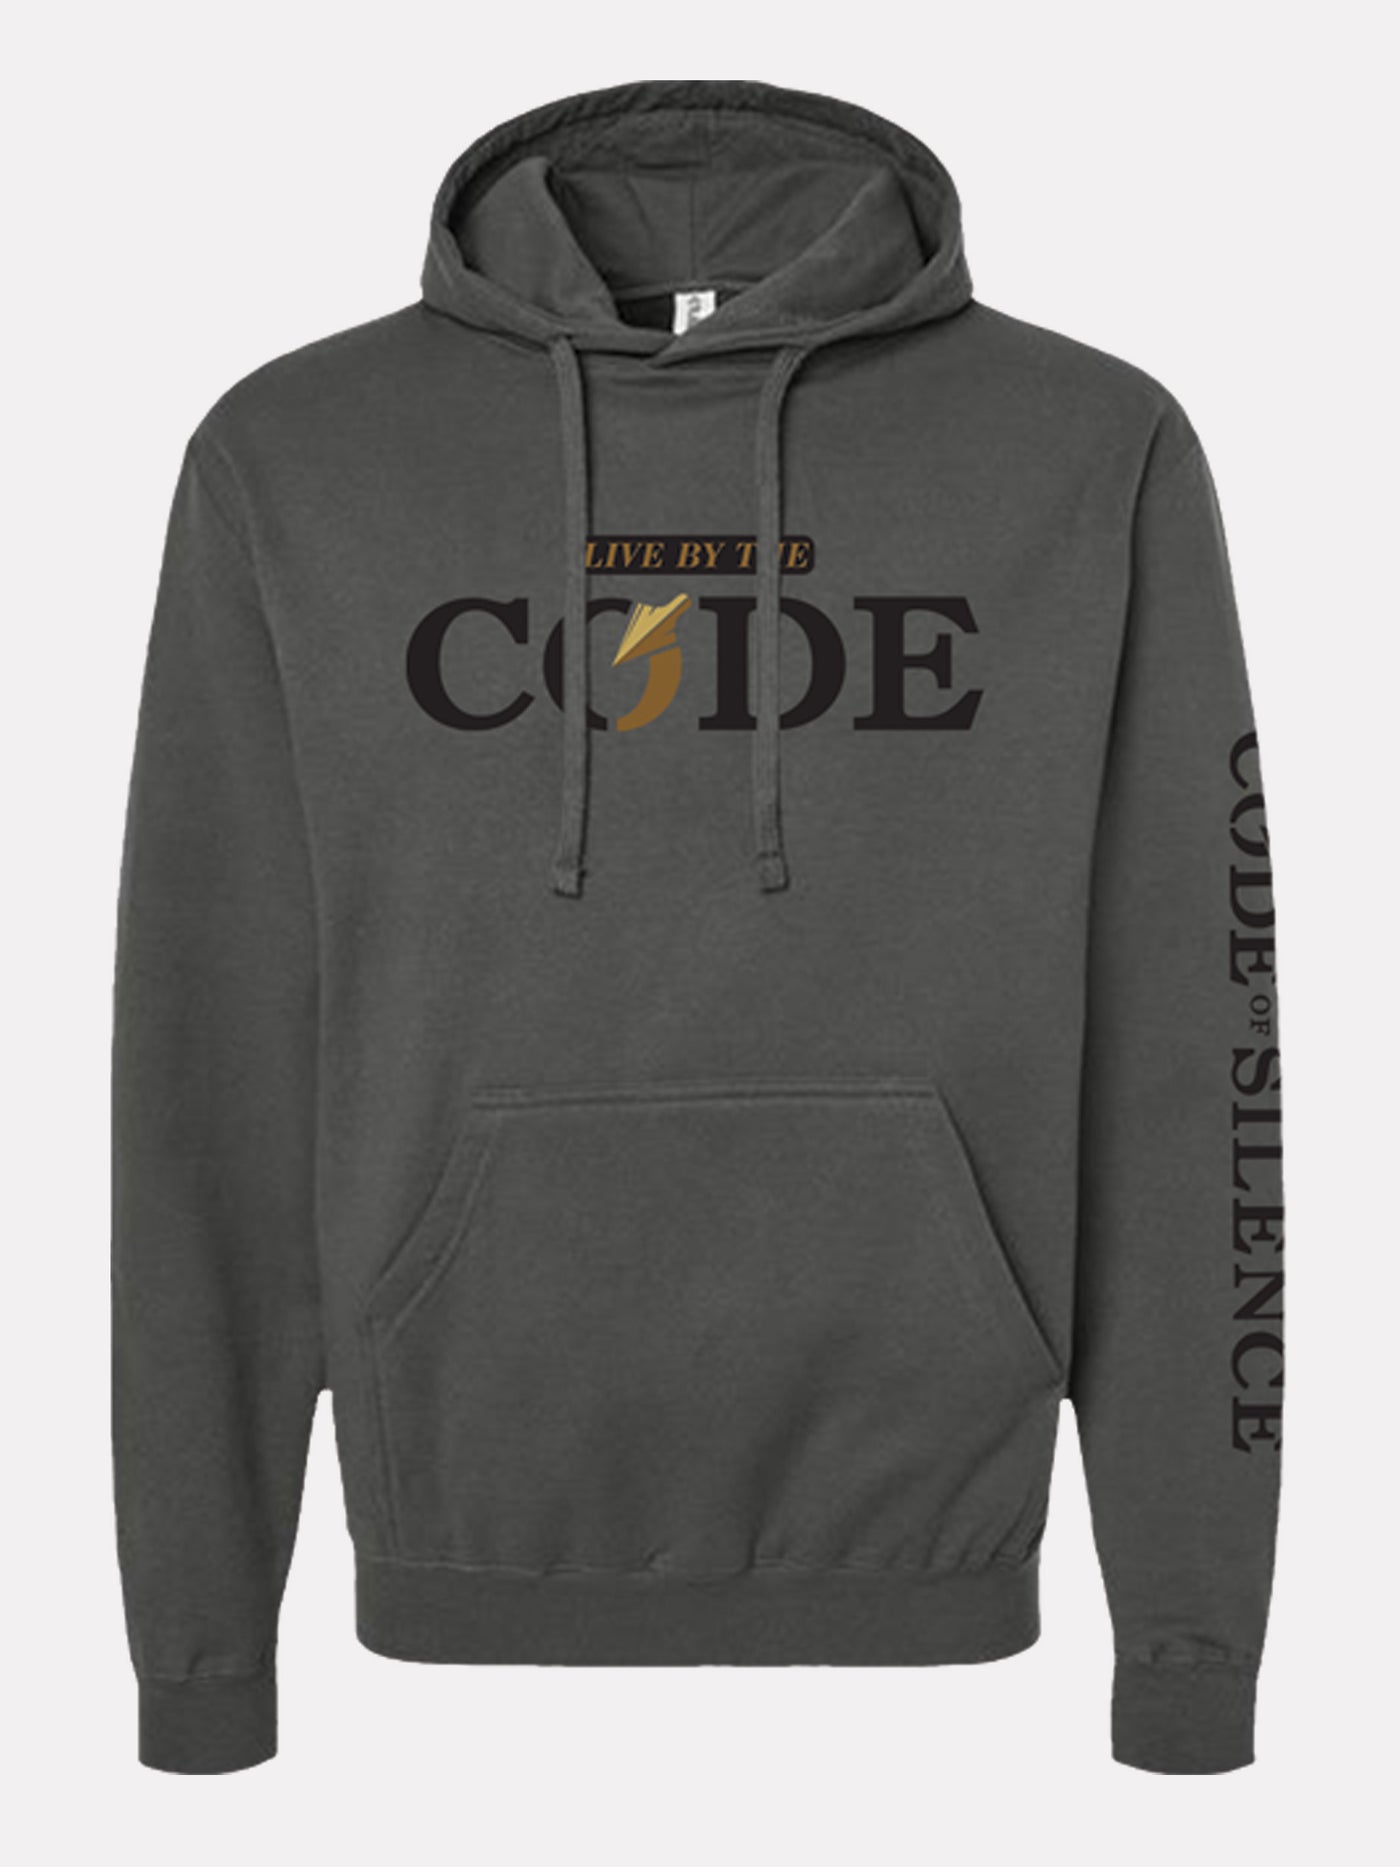 Live by the CODE Hoodie